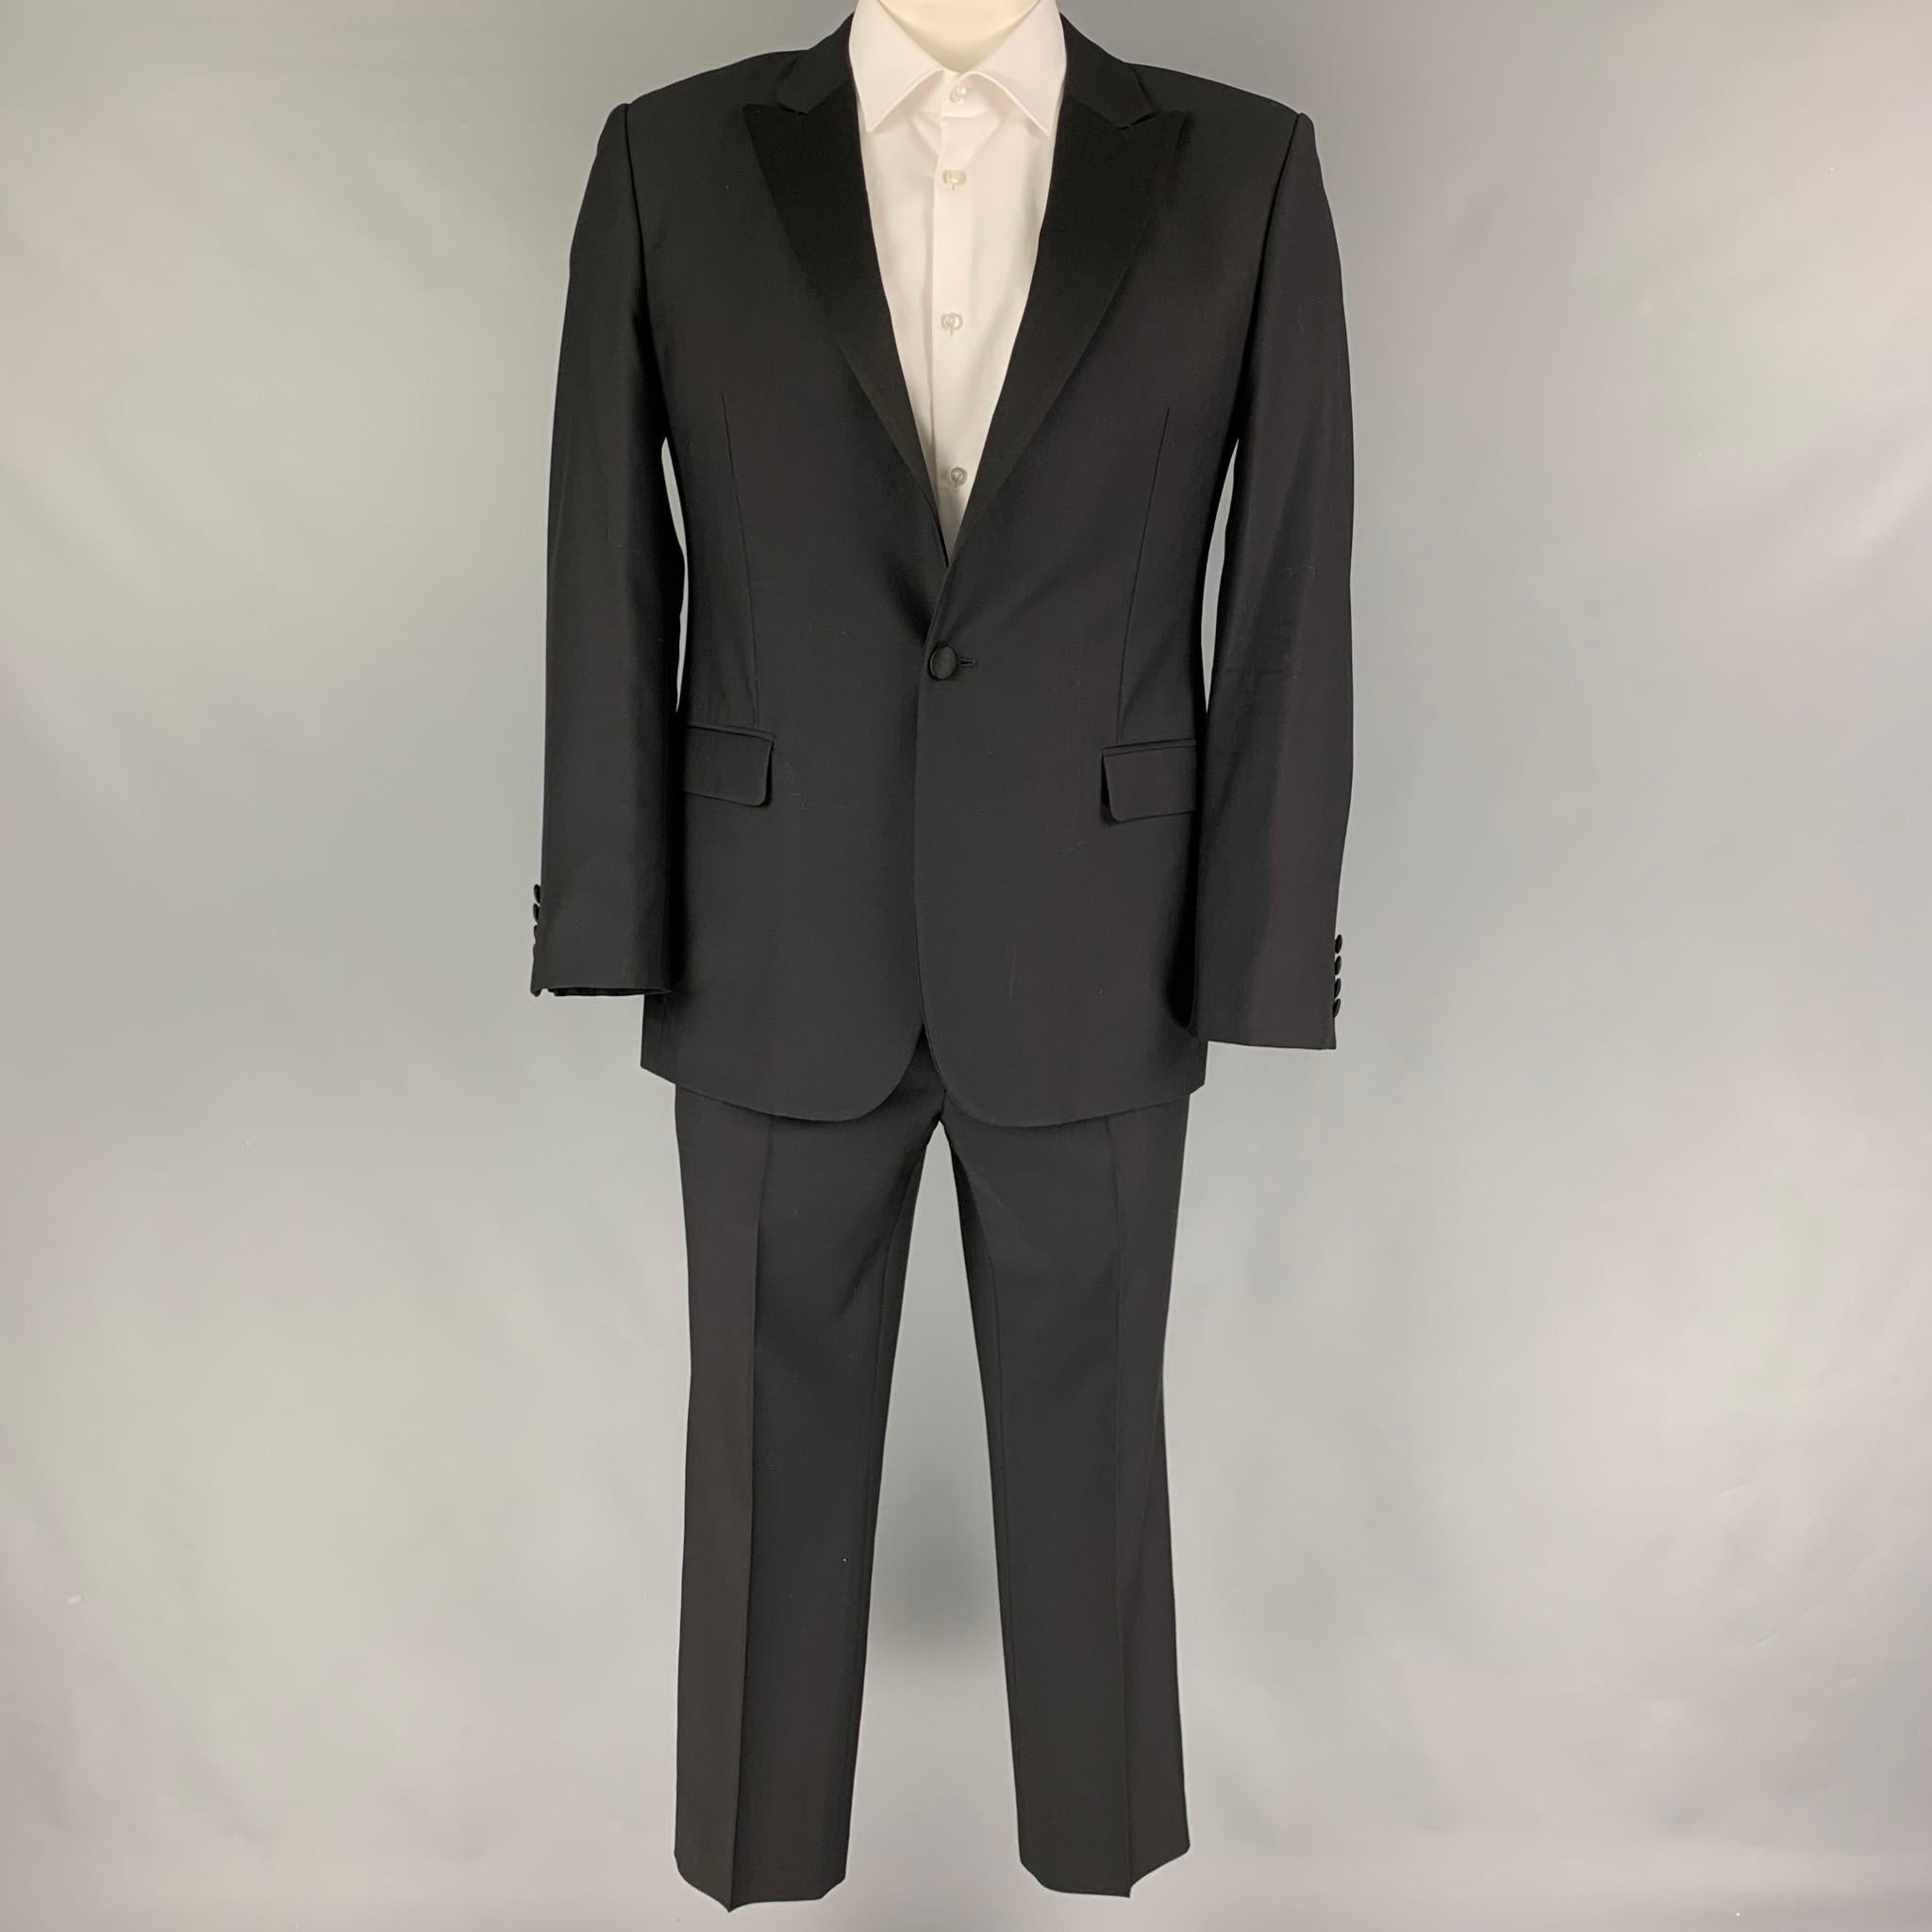 CALVIN KLEIN COLLECTION suit comes in a black wool with a full liner and includes a single breasted, single button sport coat with a peak lapel and matching flat front trousers.

Very Good Pre-Owned Condition.
Marked: